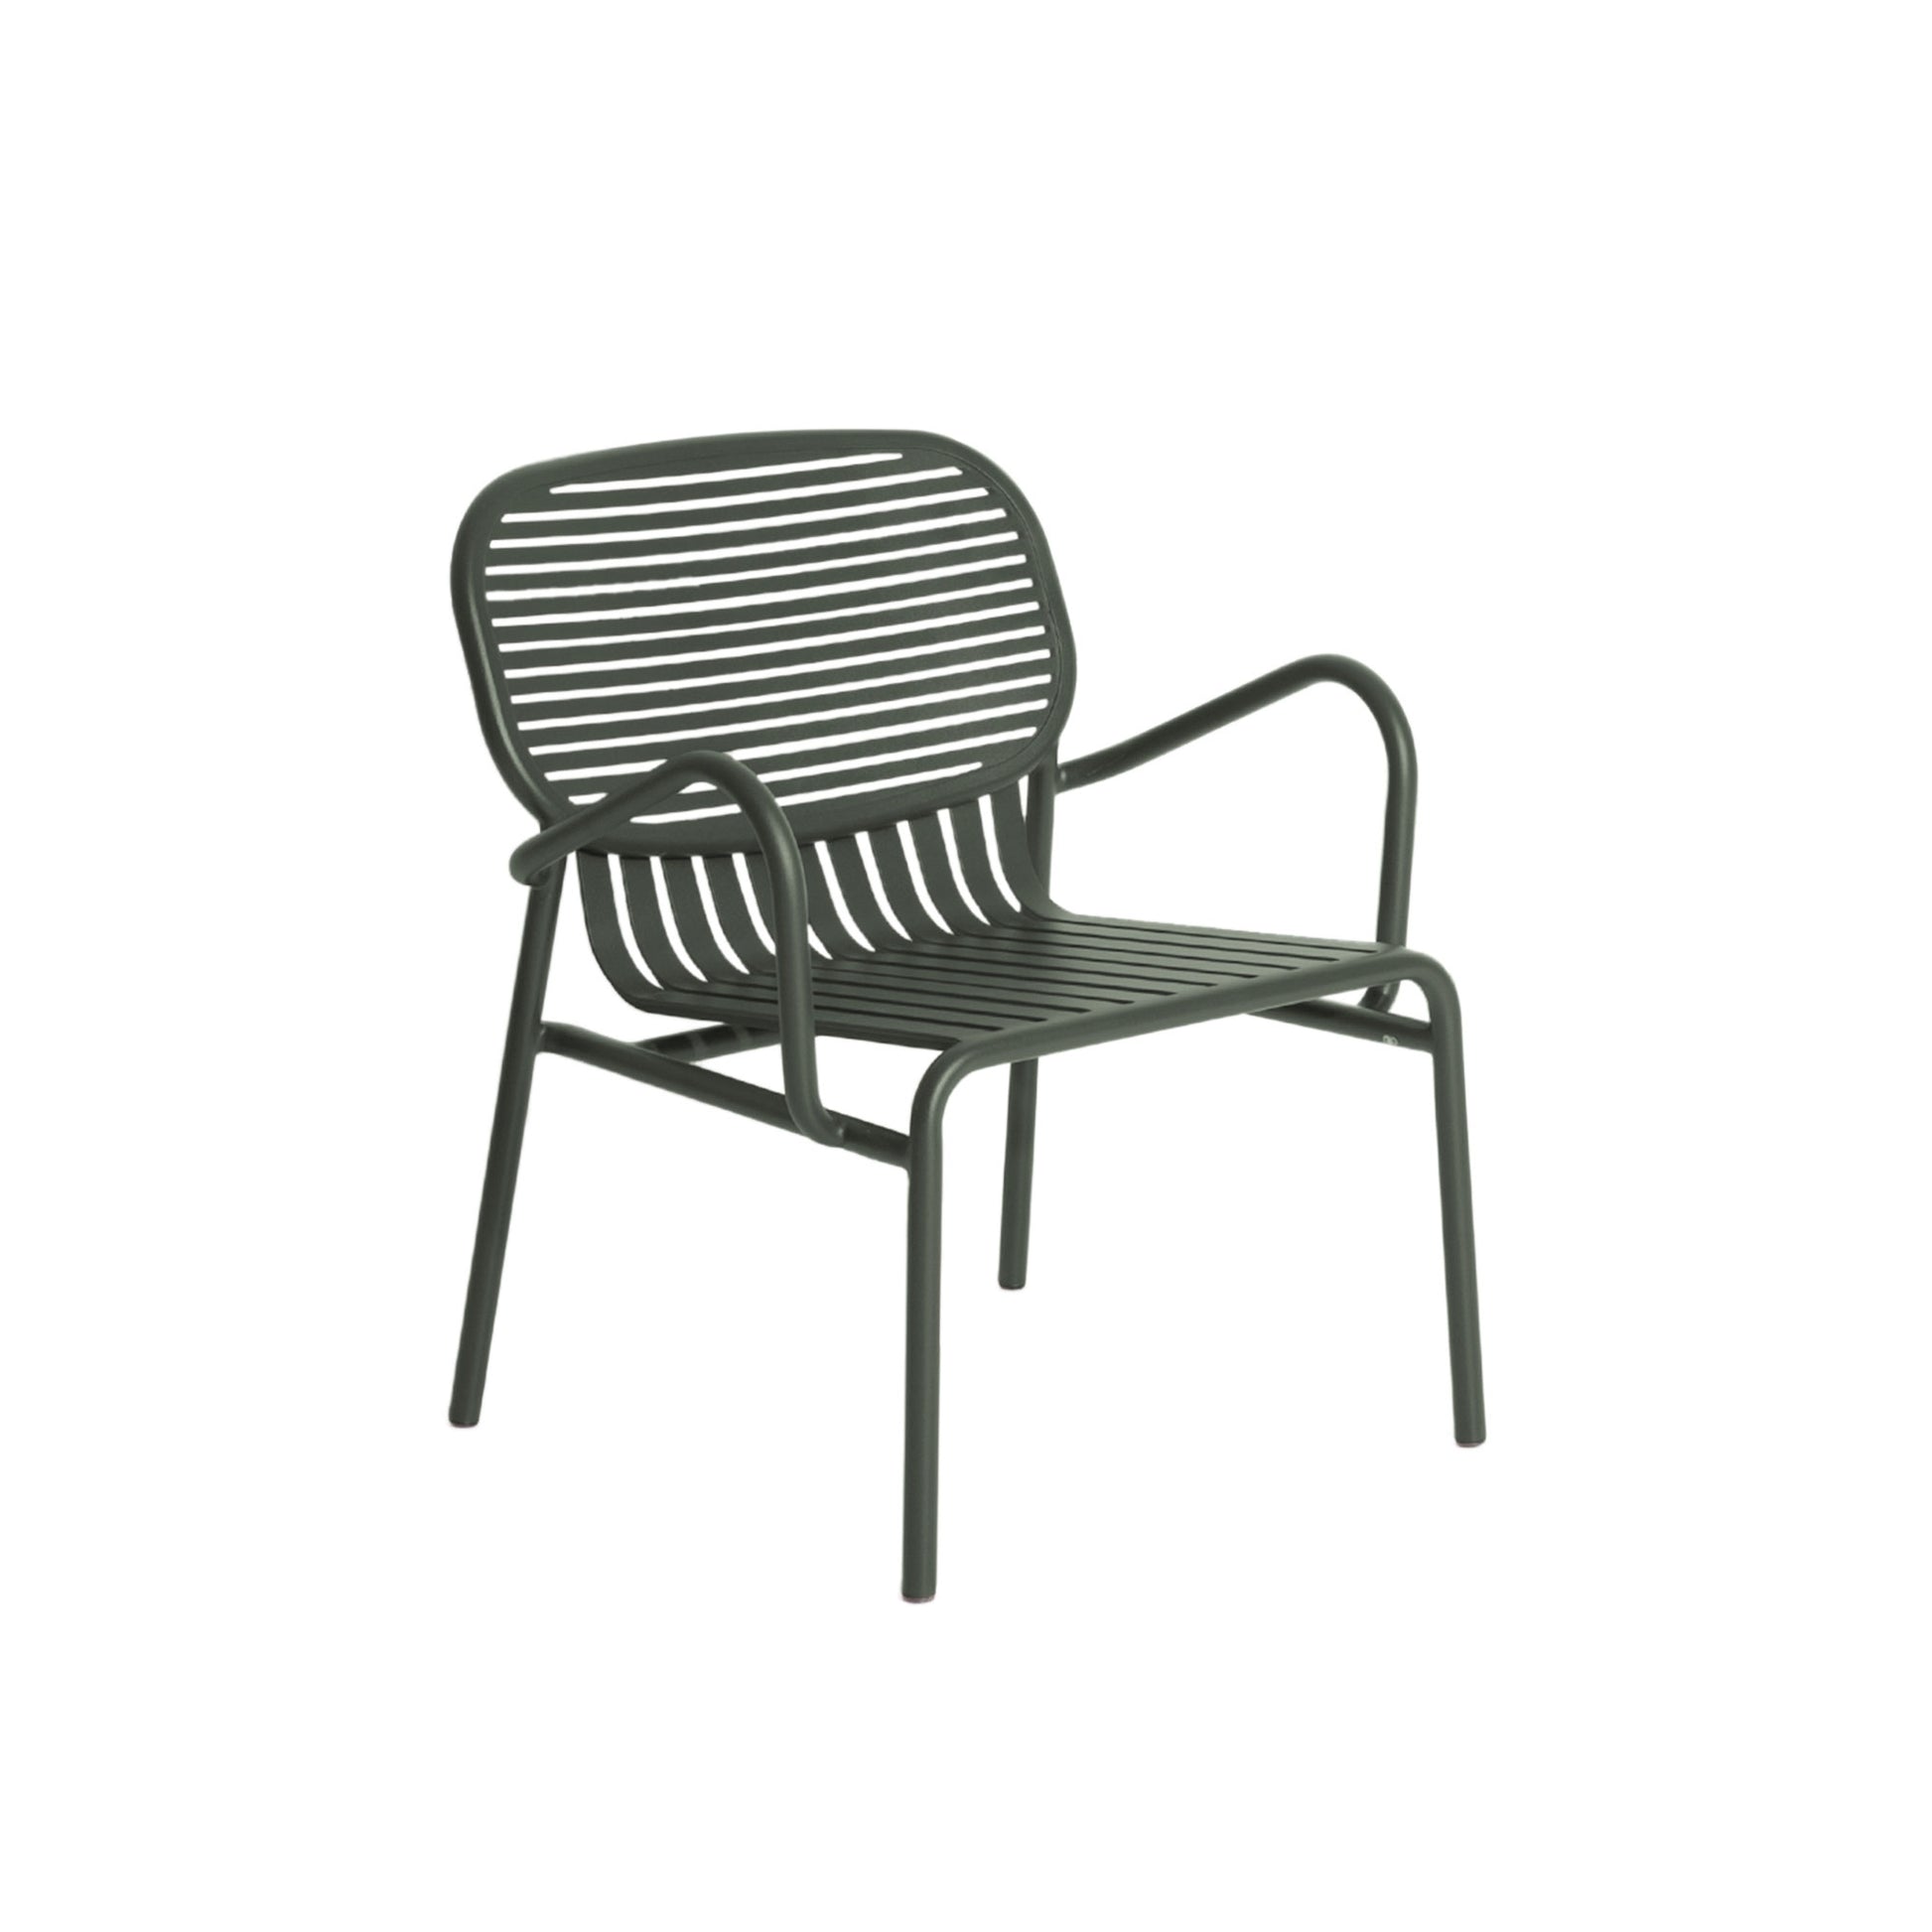 WEEK-END Armchair by Petite Friture #Glass Green